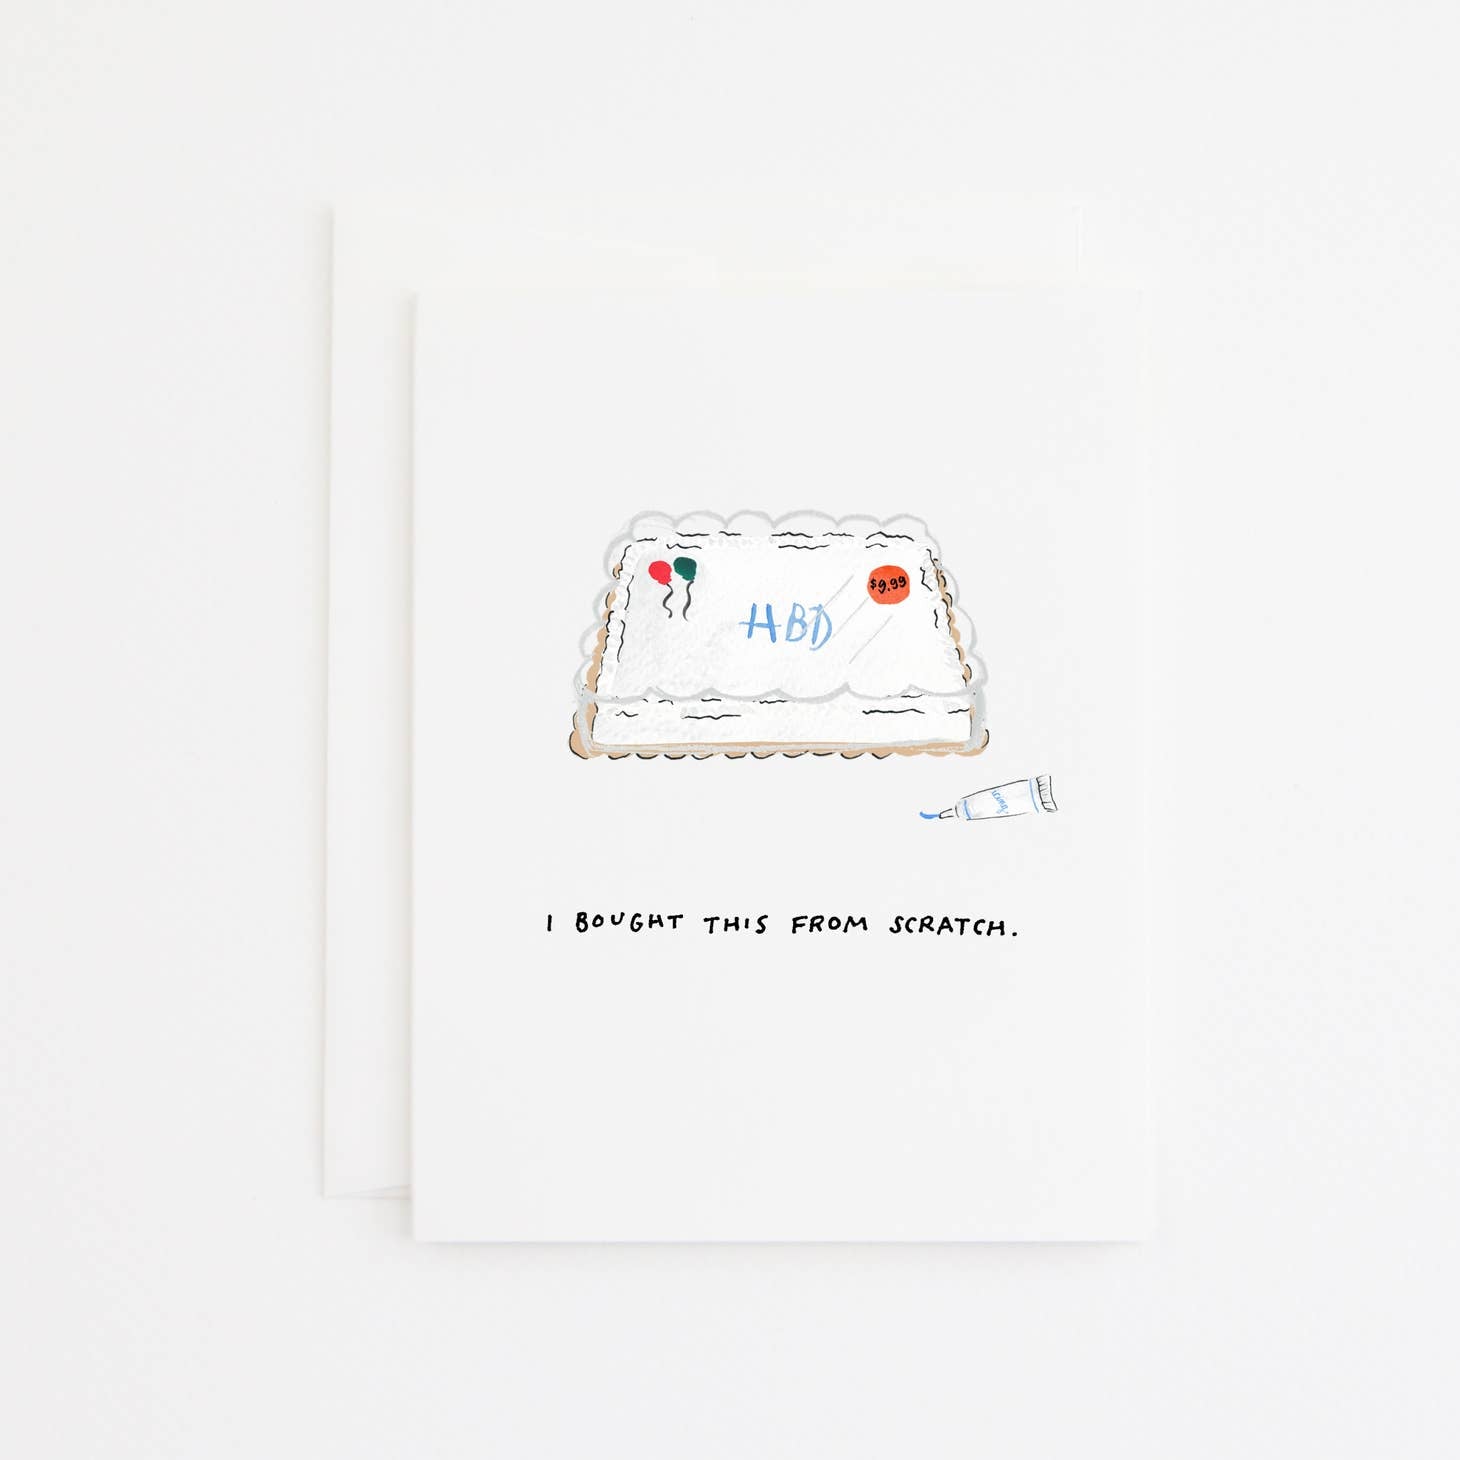 Greeting card with white background and image of a birthday sheet cake with blue frosting says, "HBD" and tube of blue frosting. Black text says, "I bought this from scratch." White envelope included. 